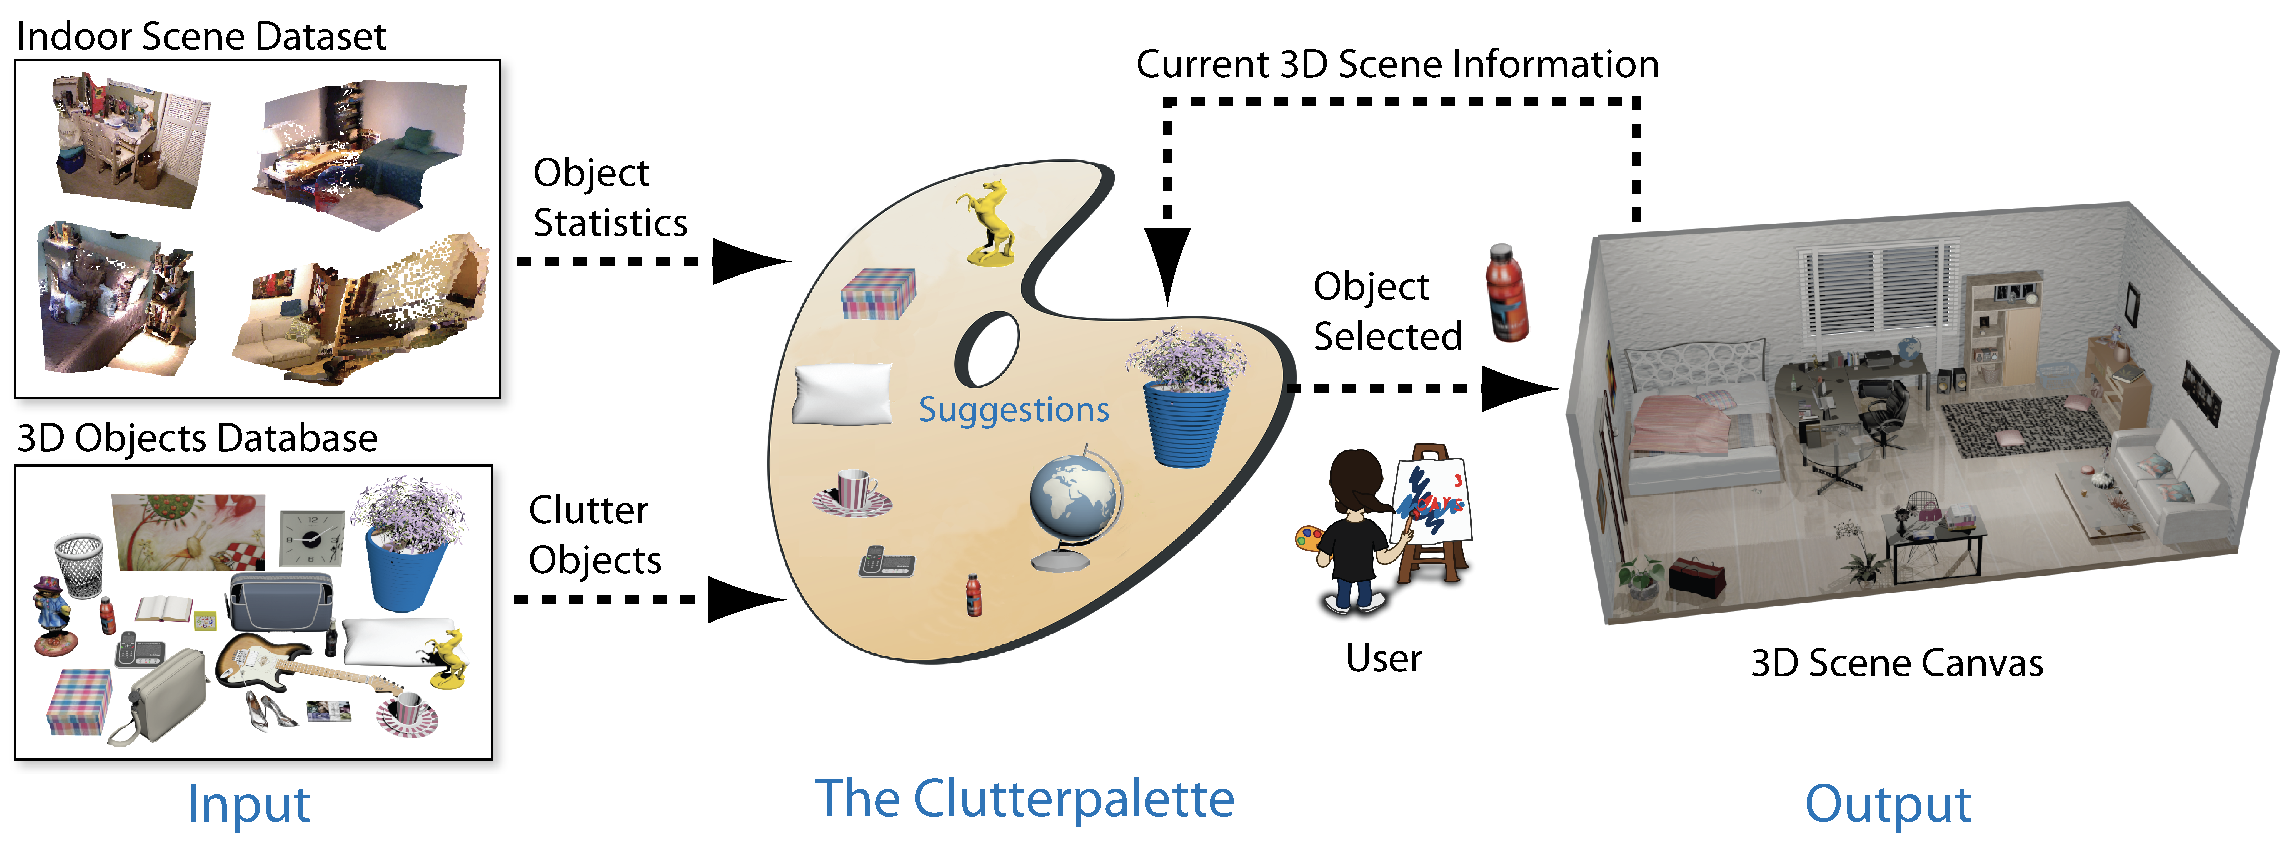 The Clutterpalette- An Interactive Tool for Detailing Indoor Scenes.png